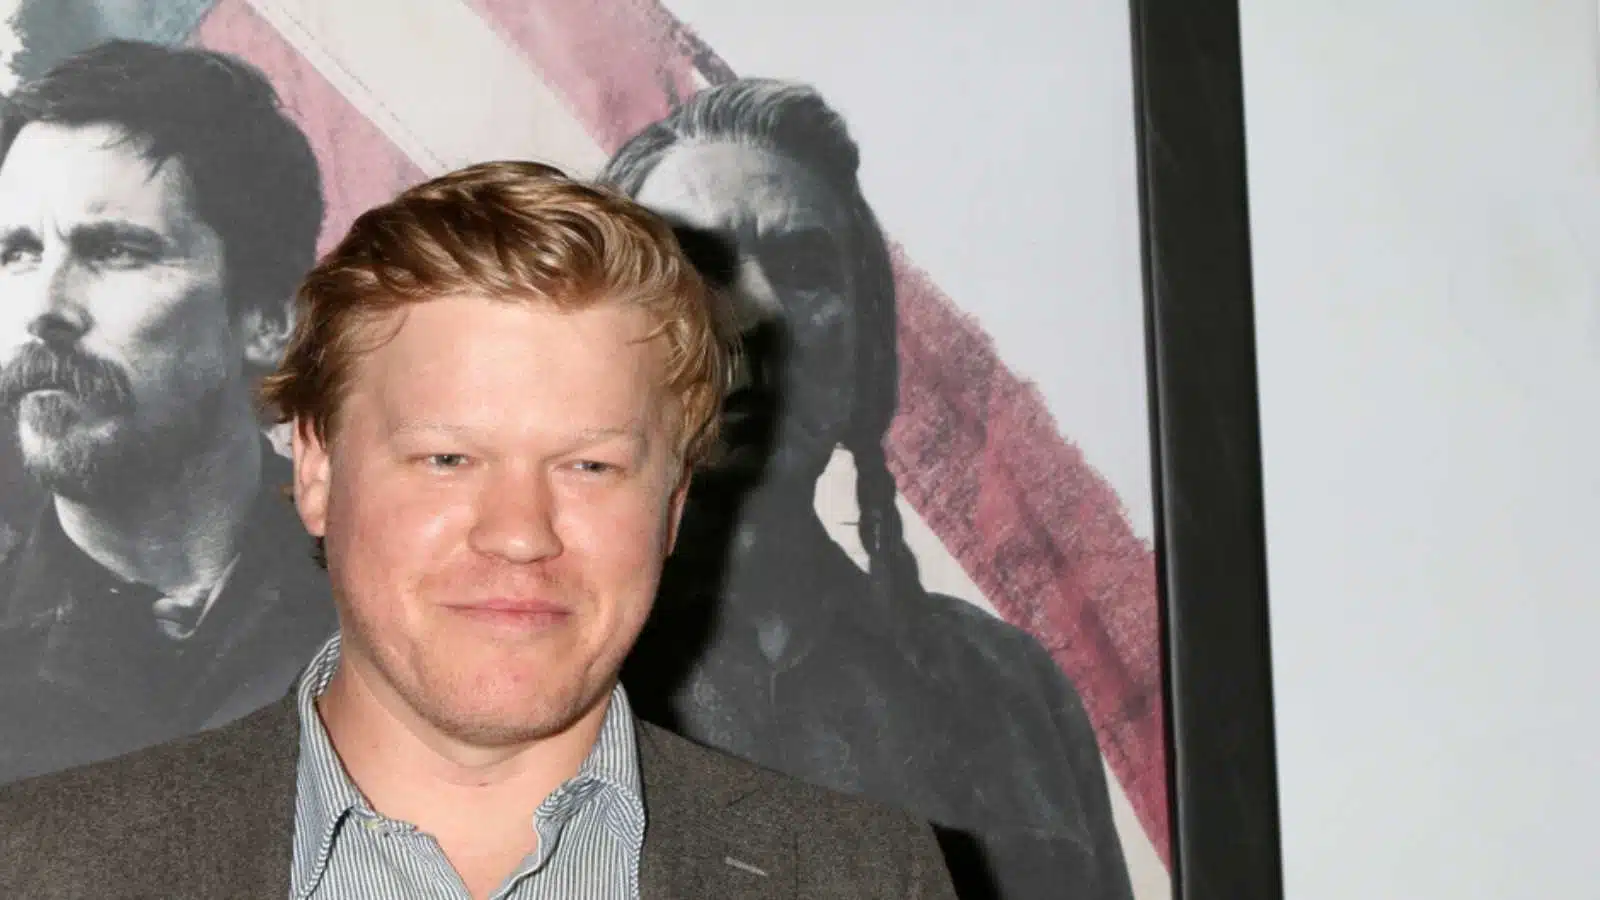 LOS ANGELES - DEC 14: Jesse Plemons at the "Hostiles" Premiere at Samuel Goldwyn Theater, The Academy of Motion Picture Arts and Sciences on December 14, 2017 in Beverly Hills, CA